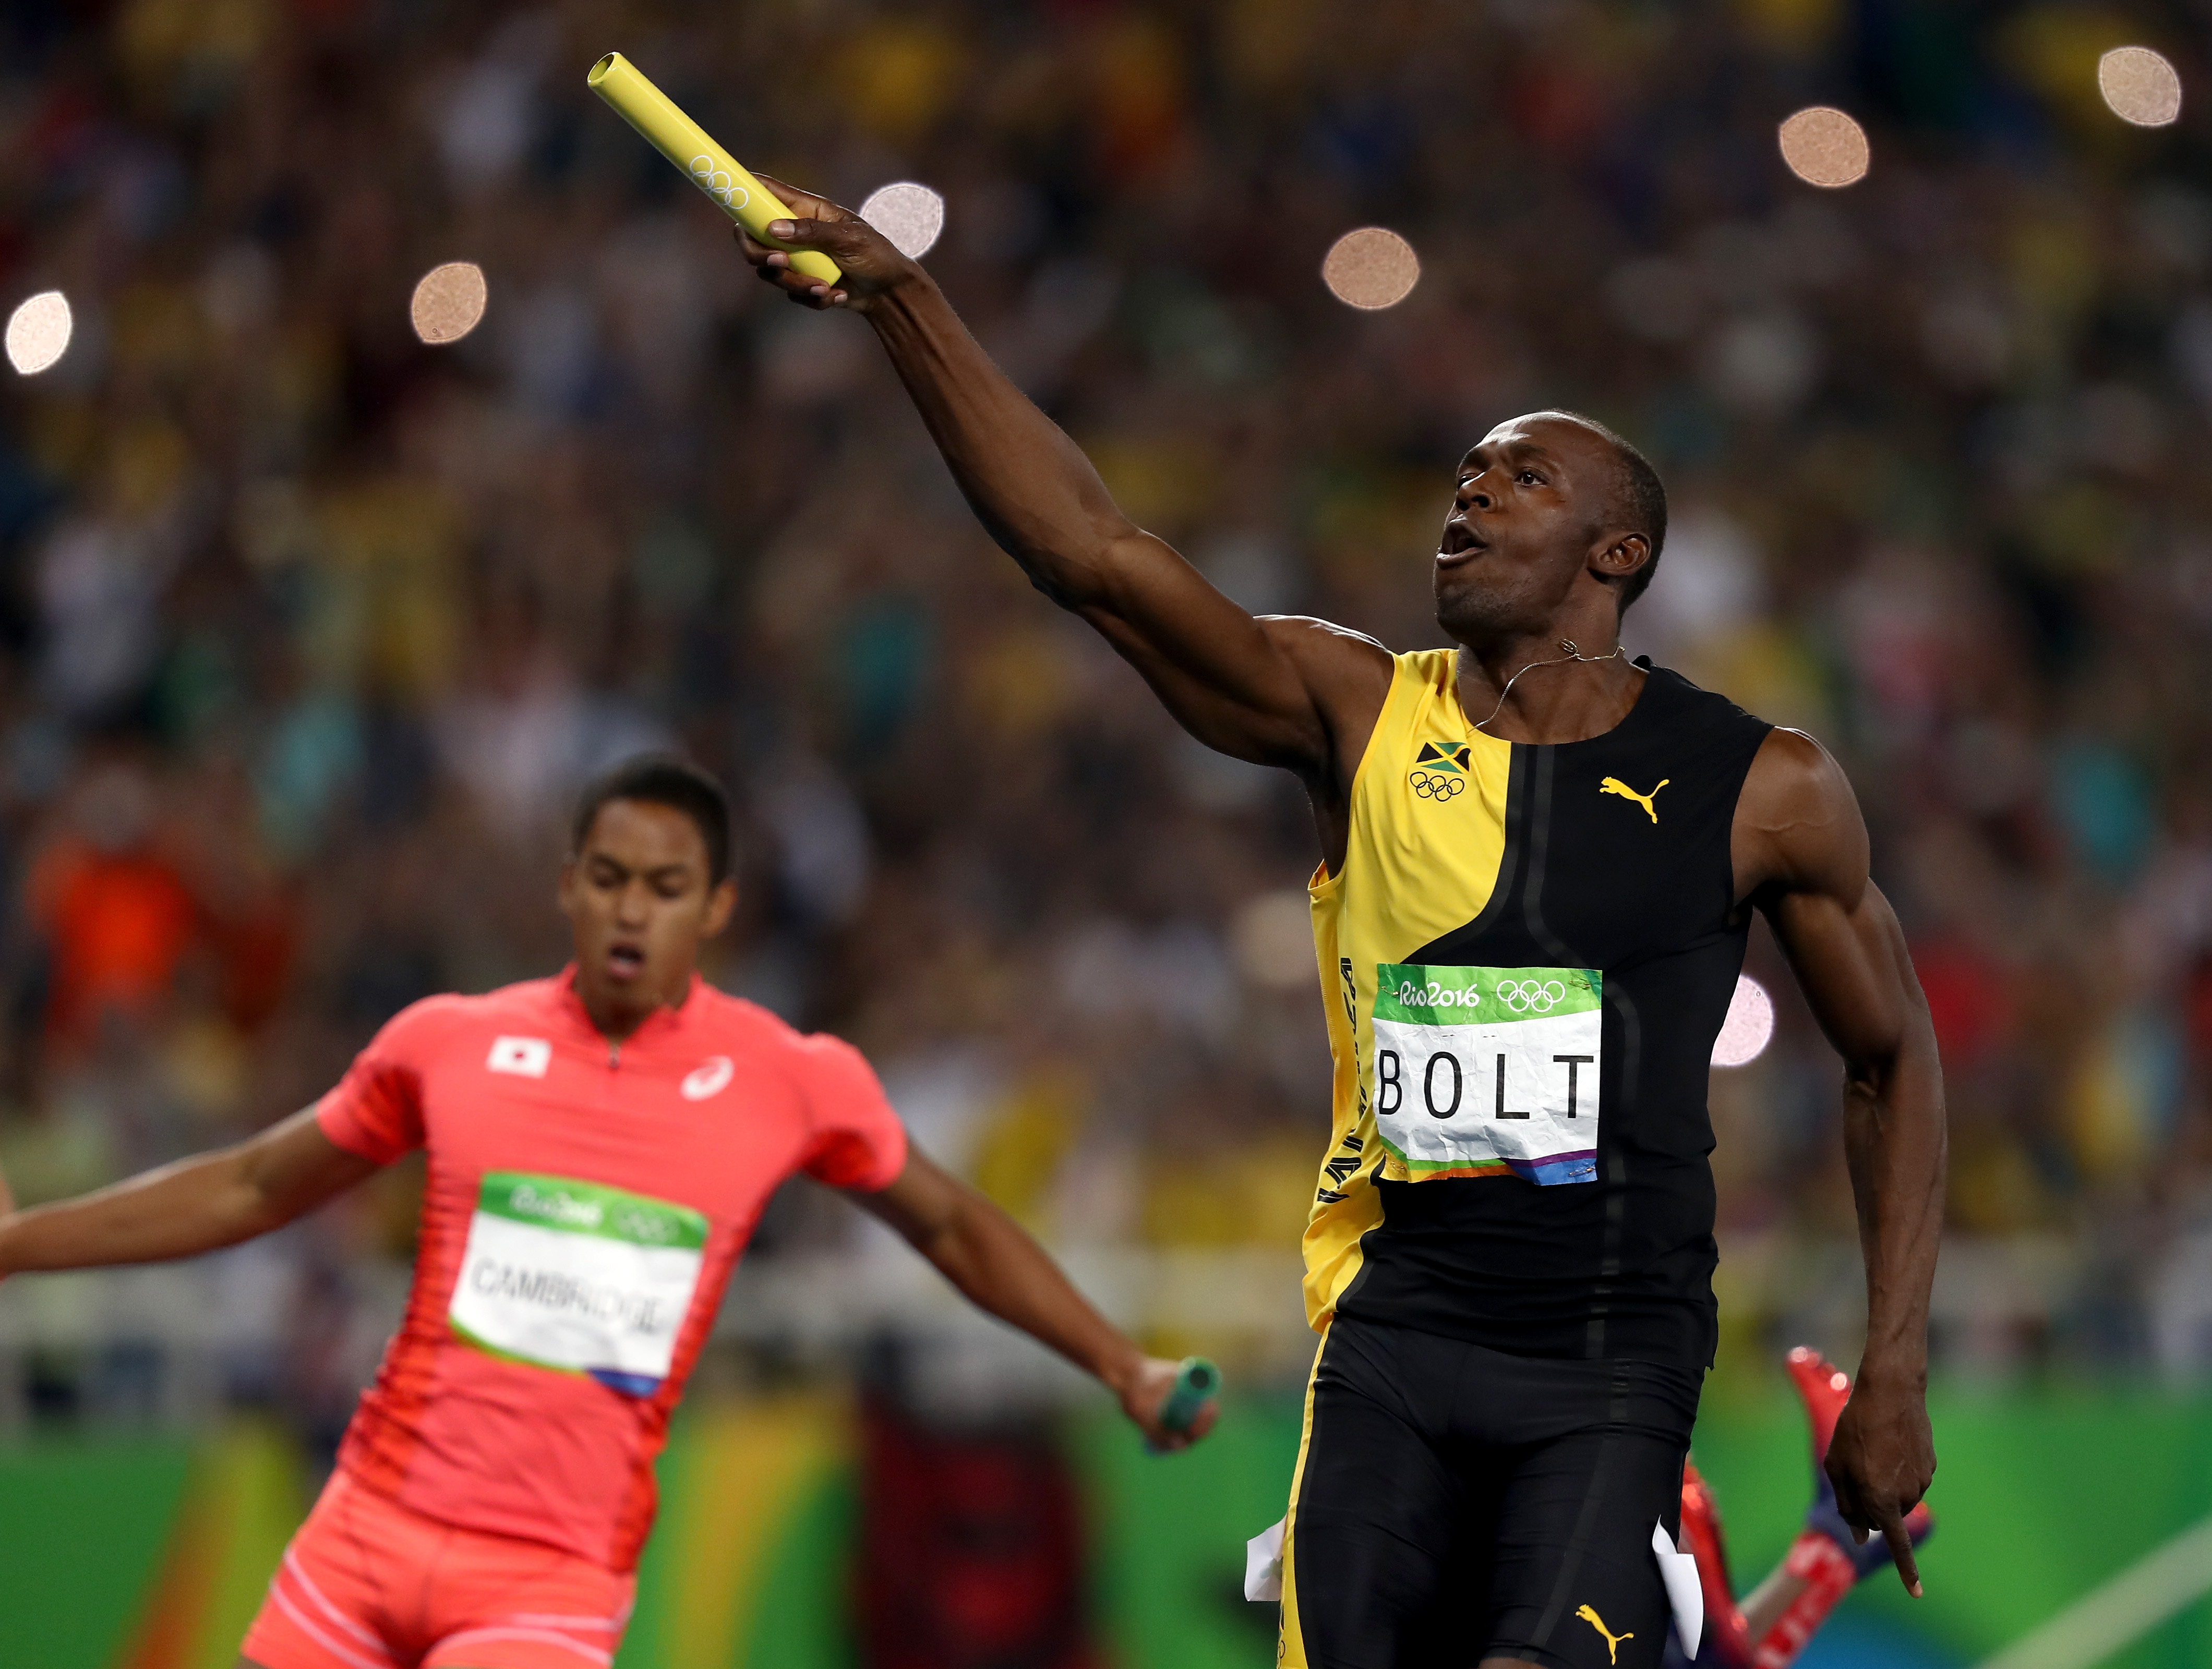 Usain Bolt : It's rough that I have to give back one of my medals